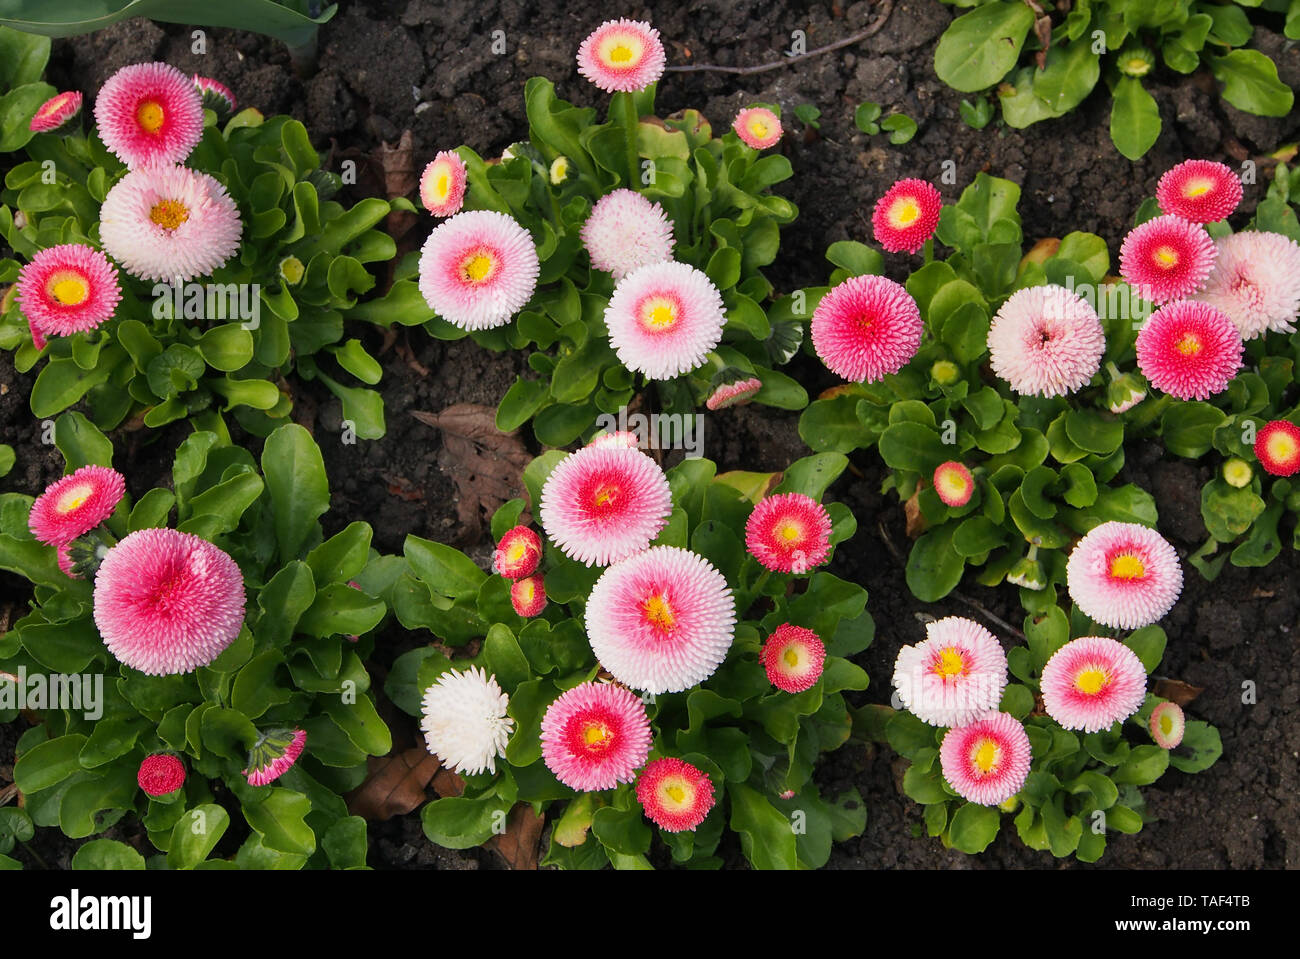 Group of Bellis Perennis Pomponette (bellis daisies) cultivar of the English daisy. Stock Photo